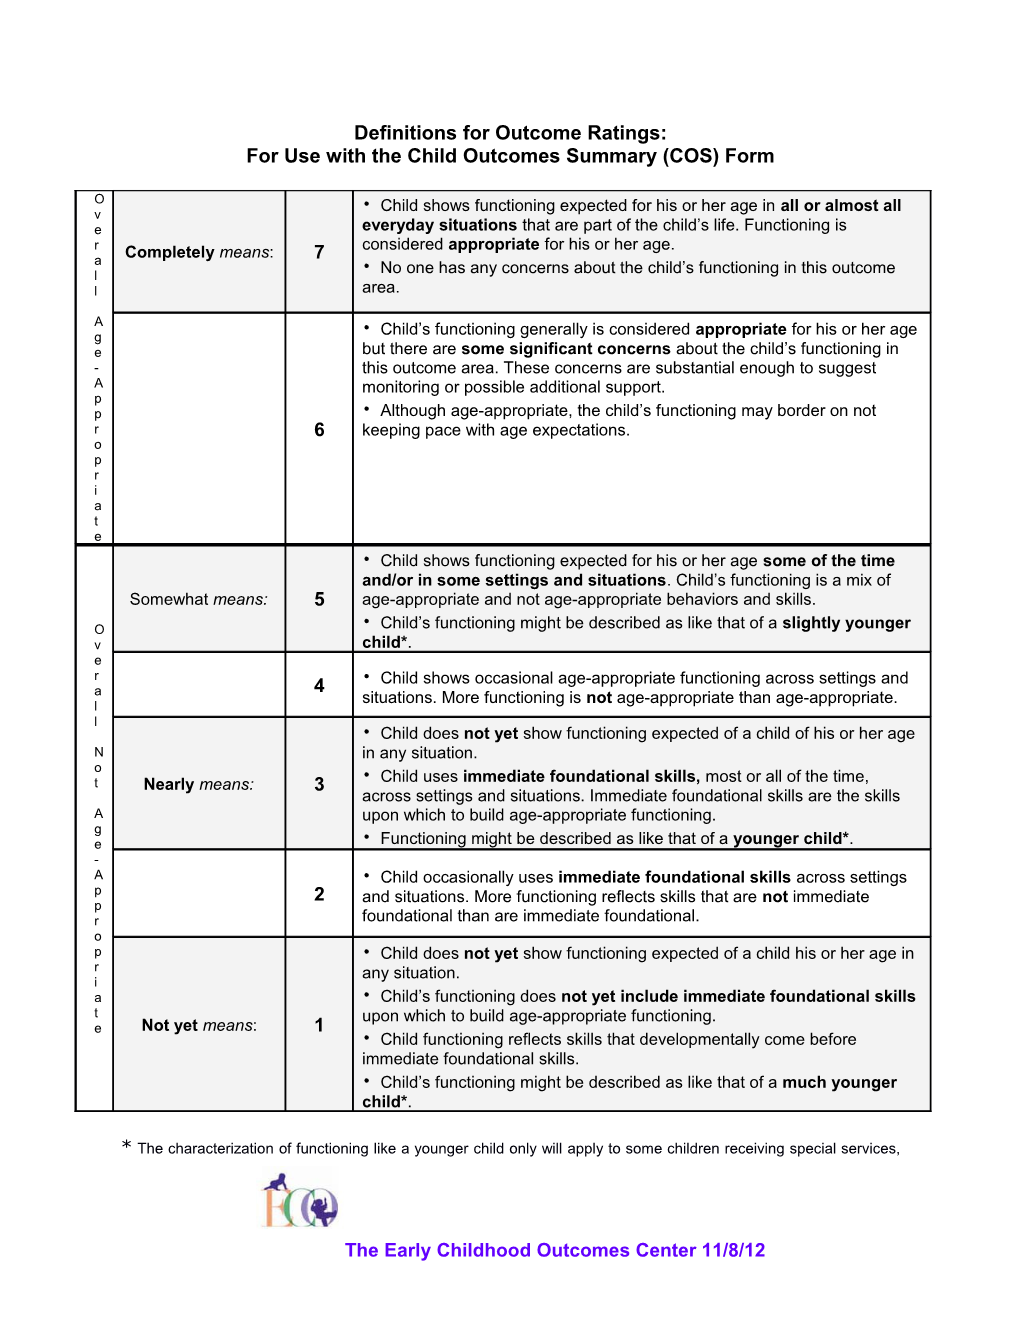 For Use with the Child Outcomes Summary (COS) Form